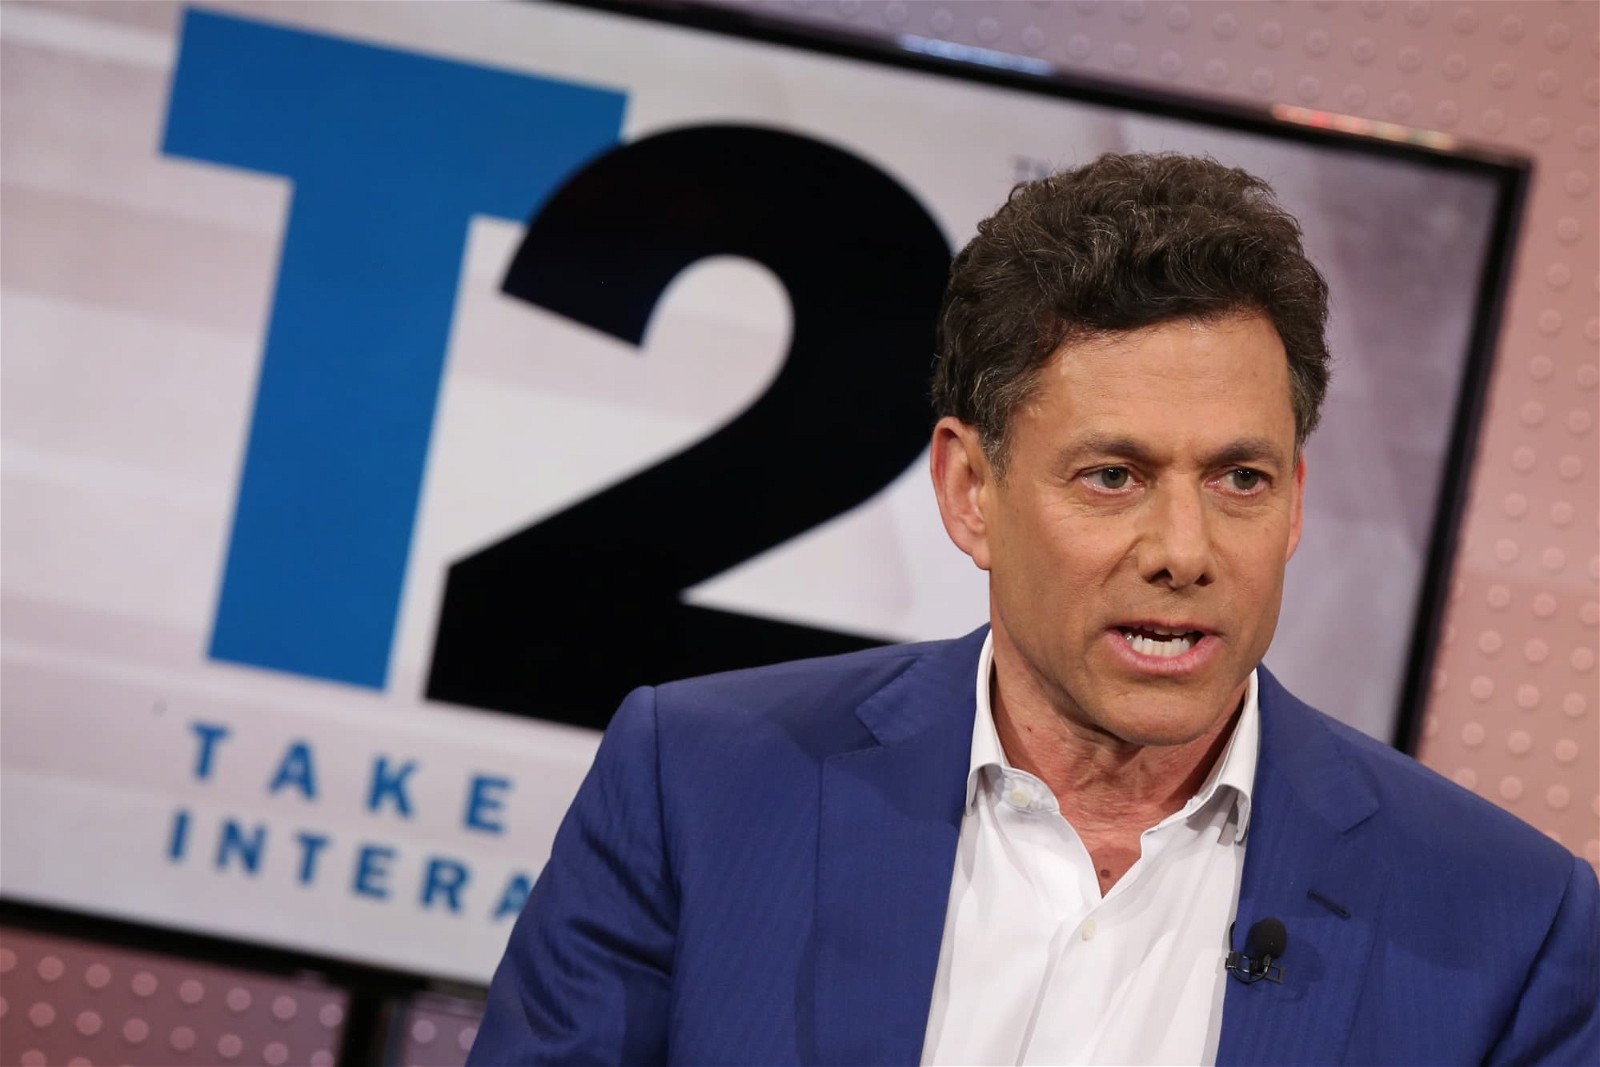 Take-Two Interactive CEO Strauss Zelnick